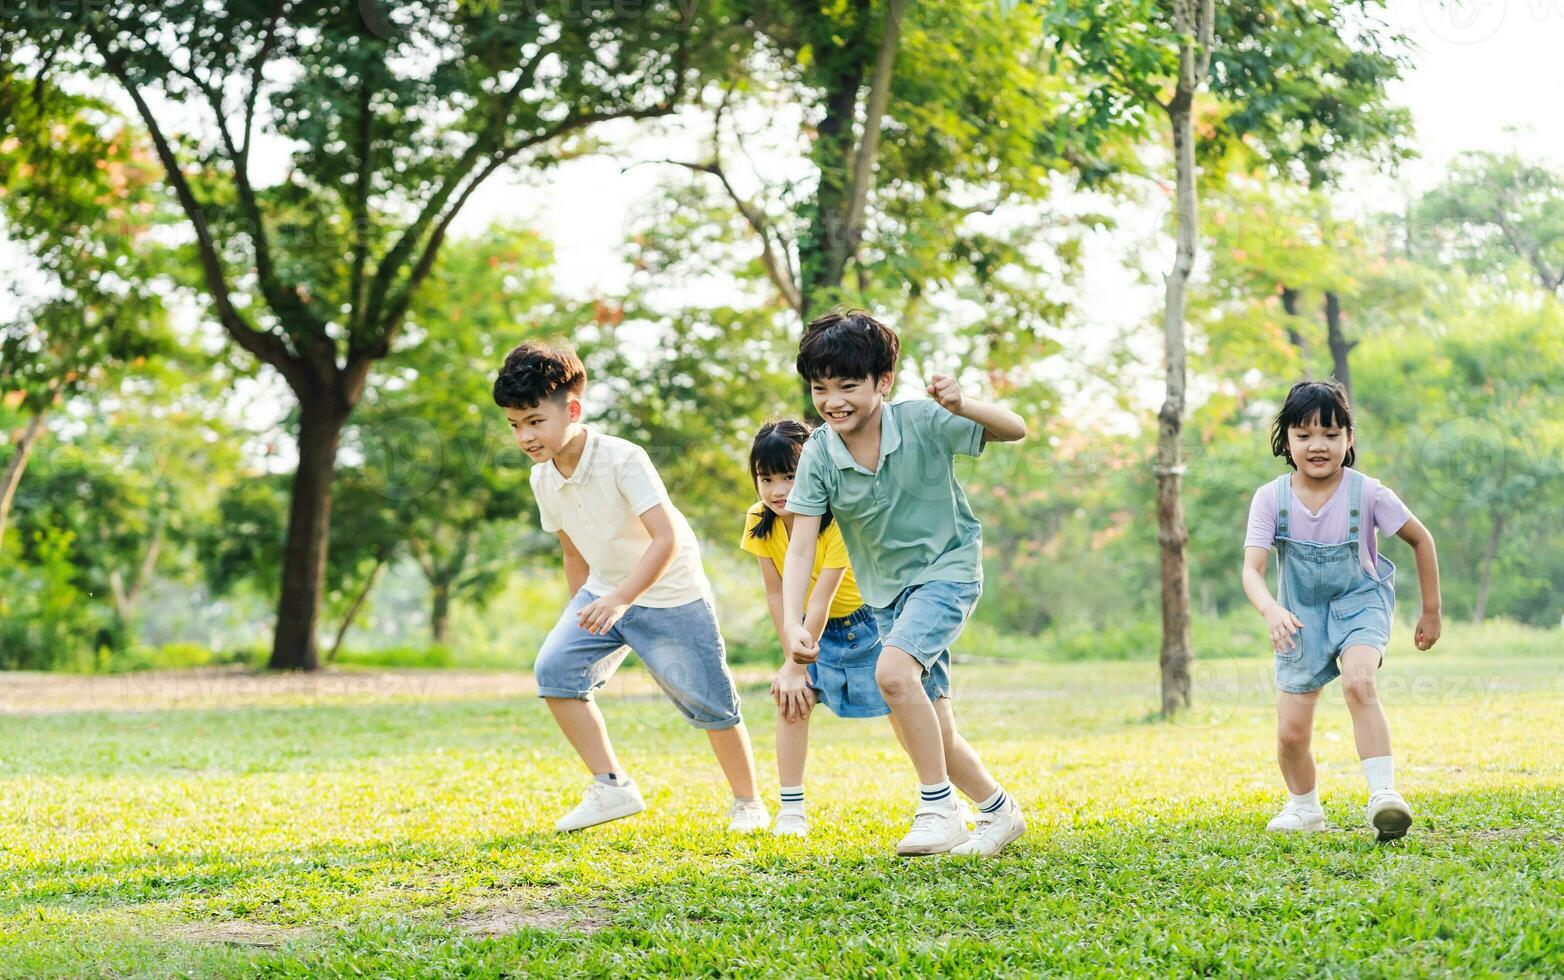 group image of asian children having fun in the park photo